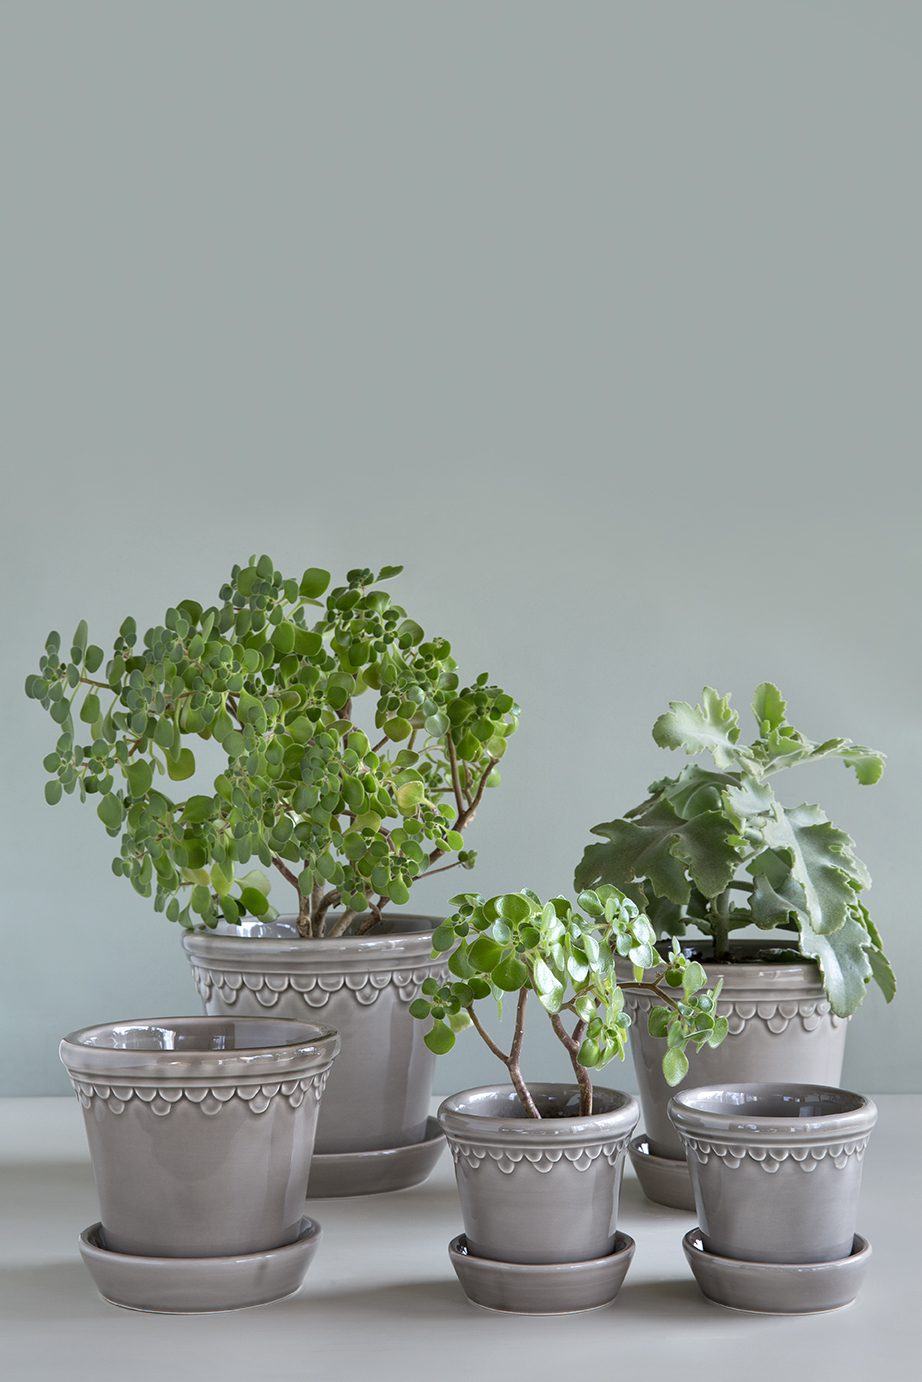 This classic and noble plant pot – Københavner – is inspired by pottery made at the Royal Danish Palace of Fredensborg in 1860.